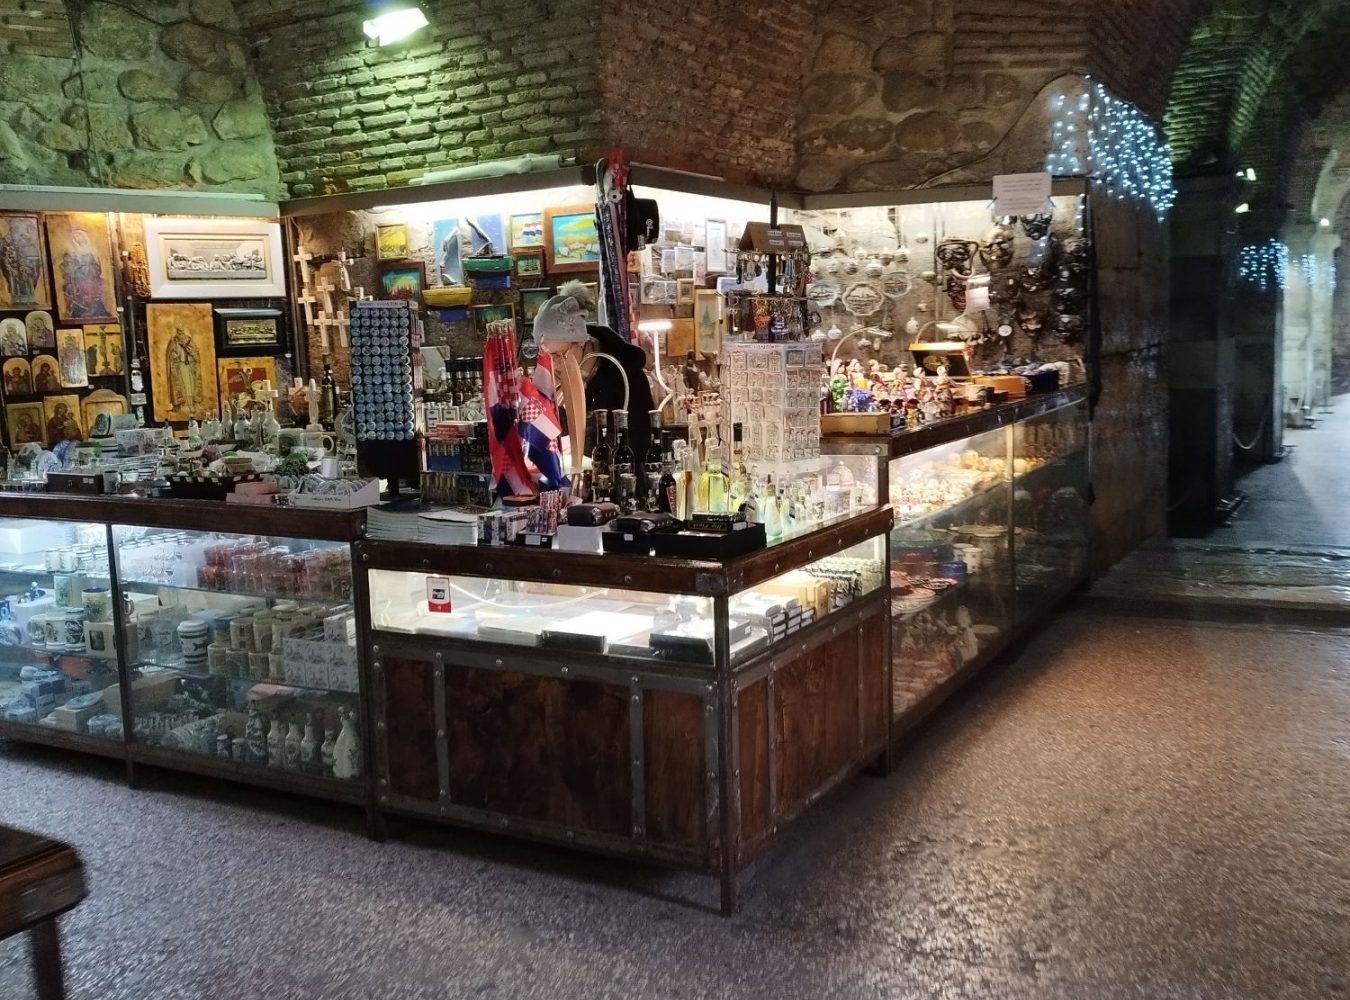 Souvenir shop in the basement of Diocletian's palace in Split